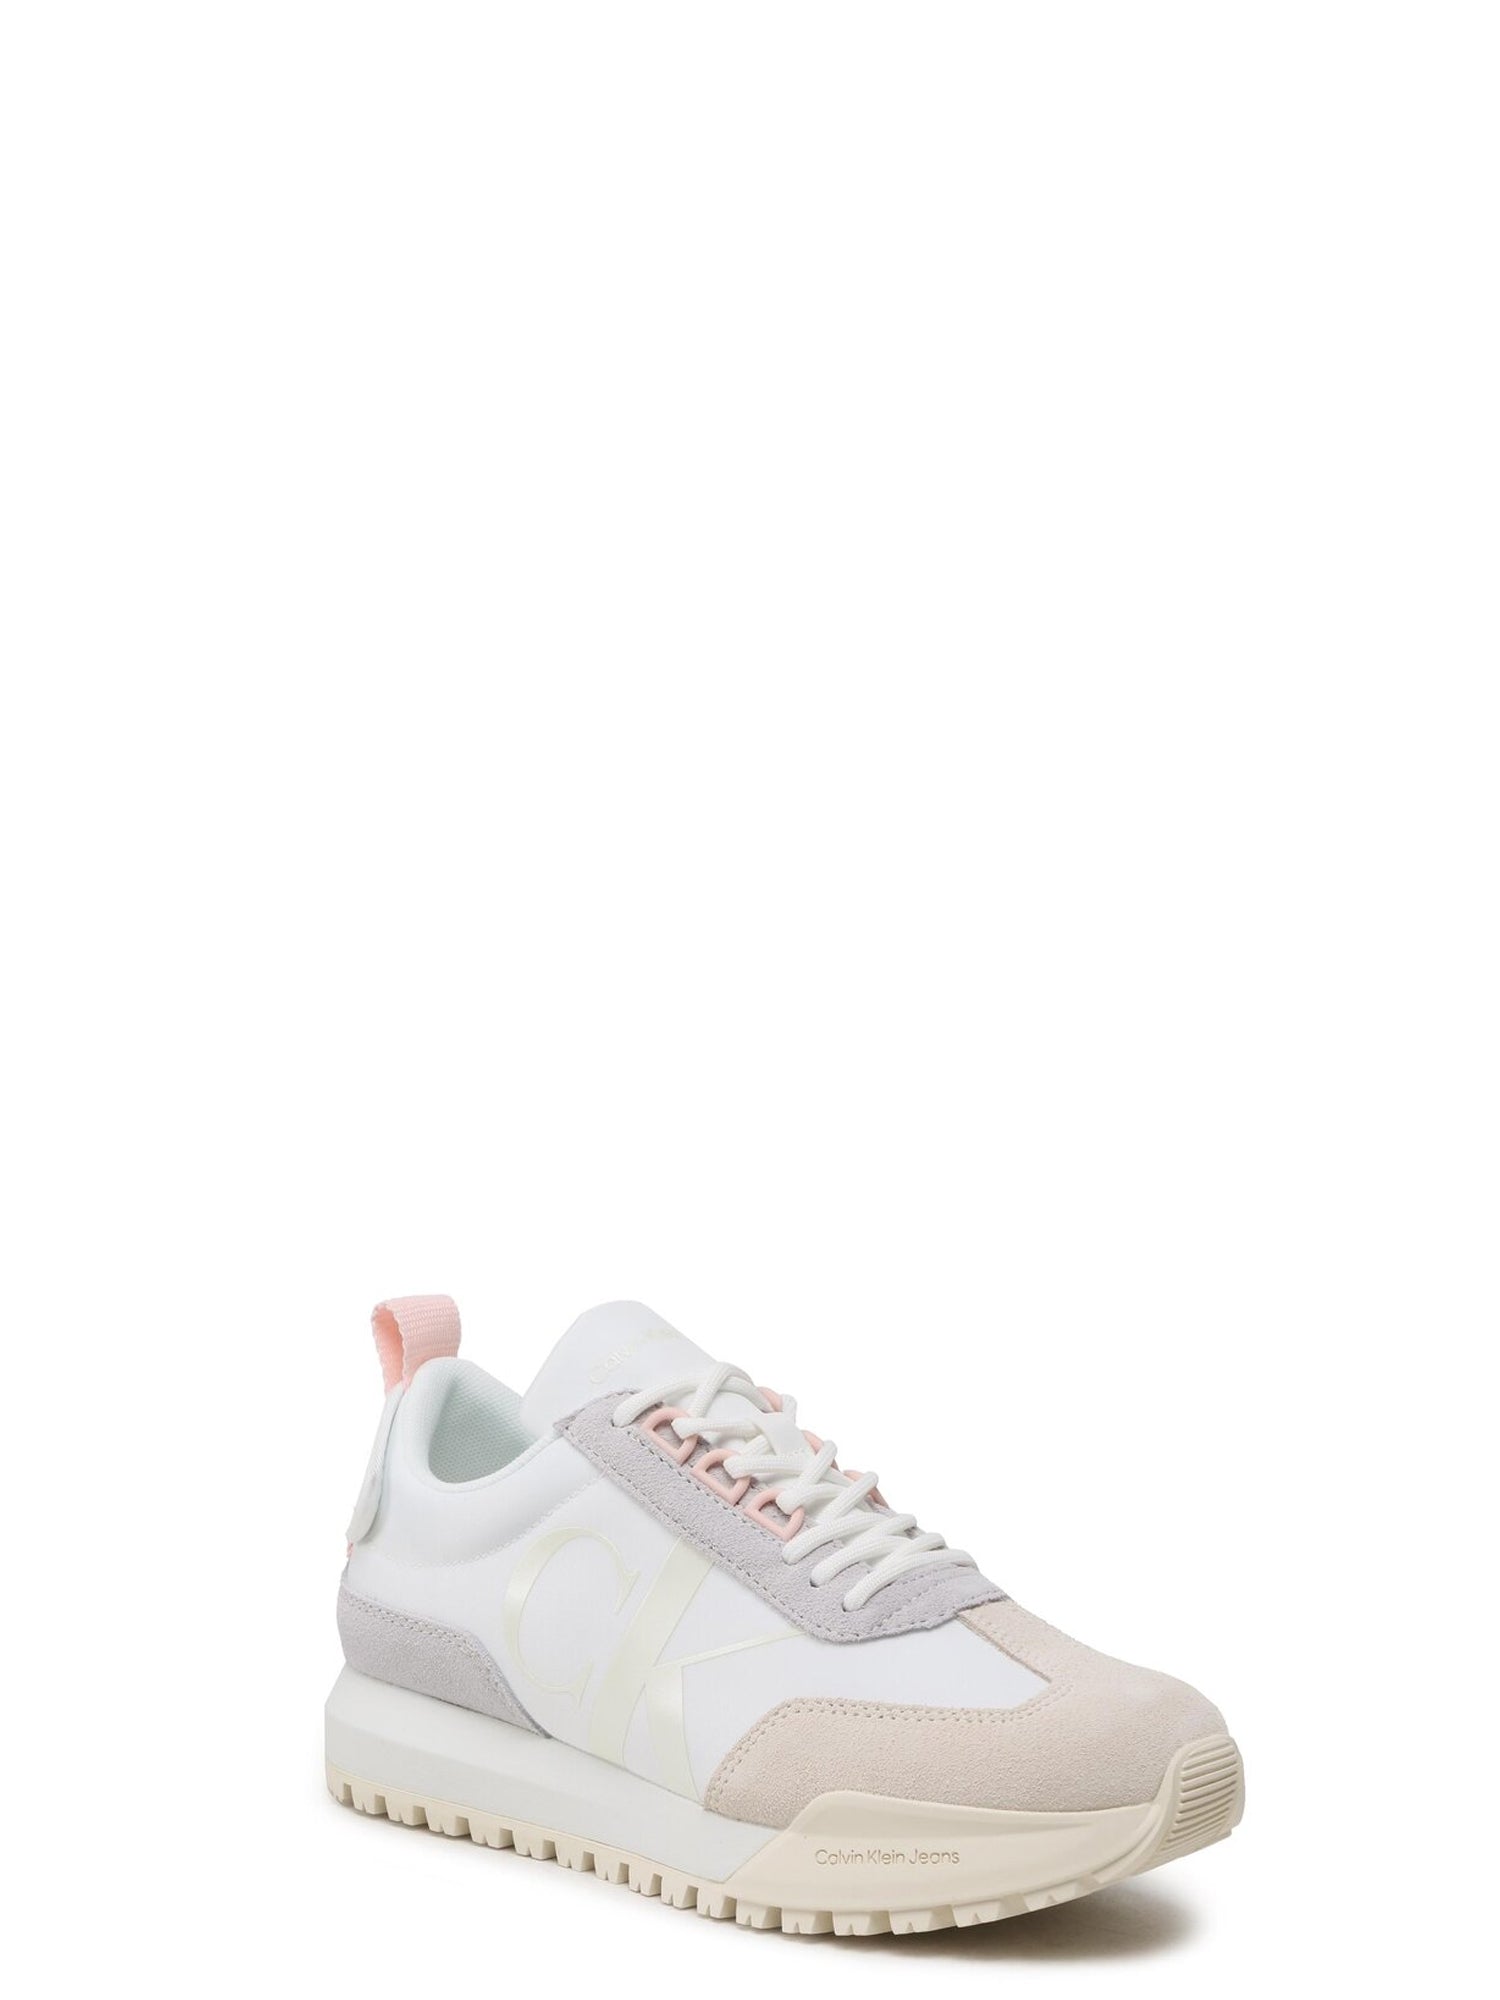 CALVIN KLEIN SHOES SNEAKERS BASSE TOOTHY RUNNER LACEUP MIX PEARL BIANCO